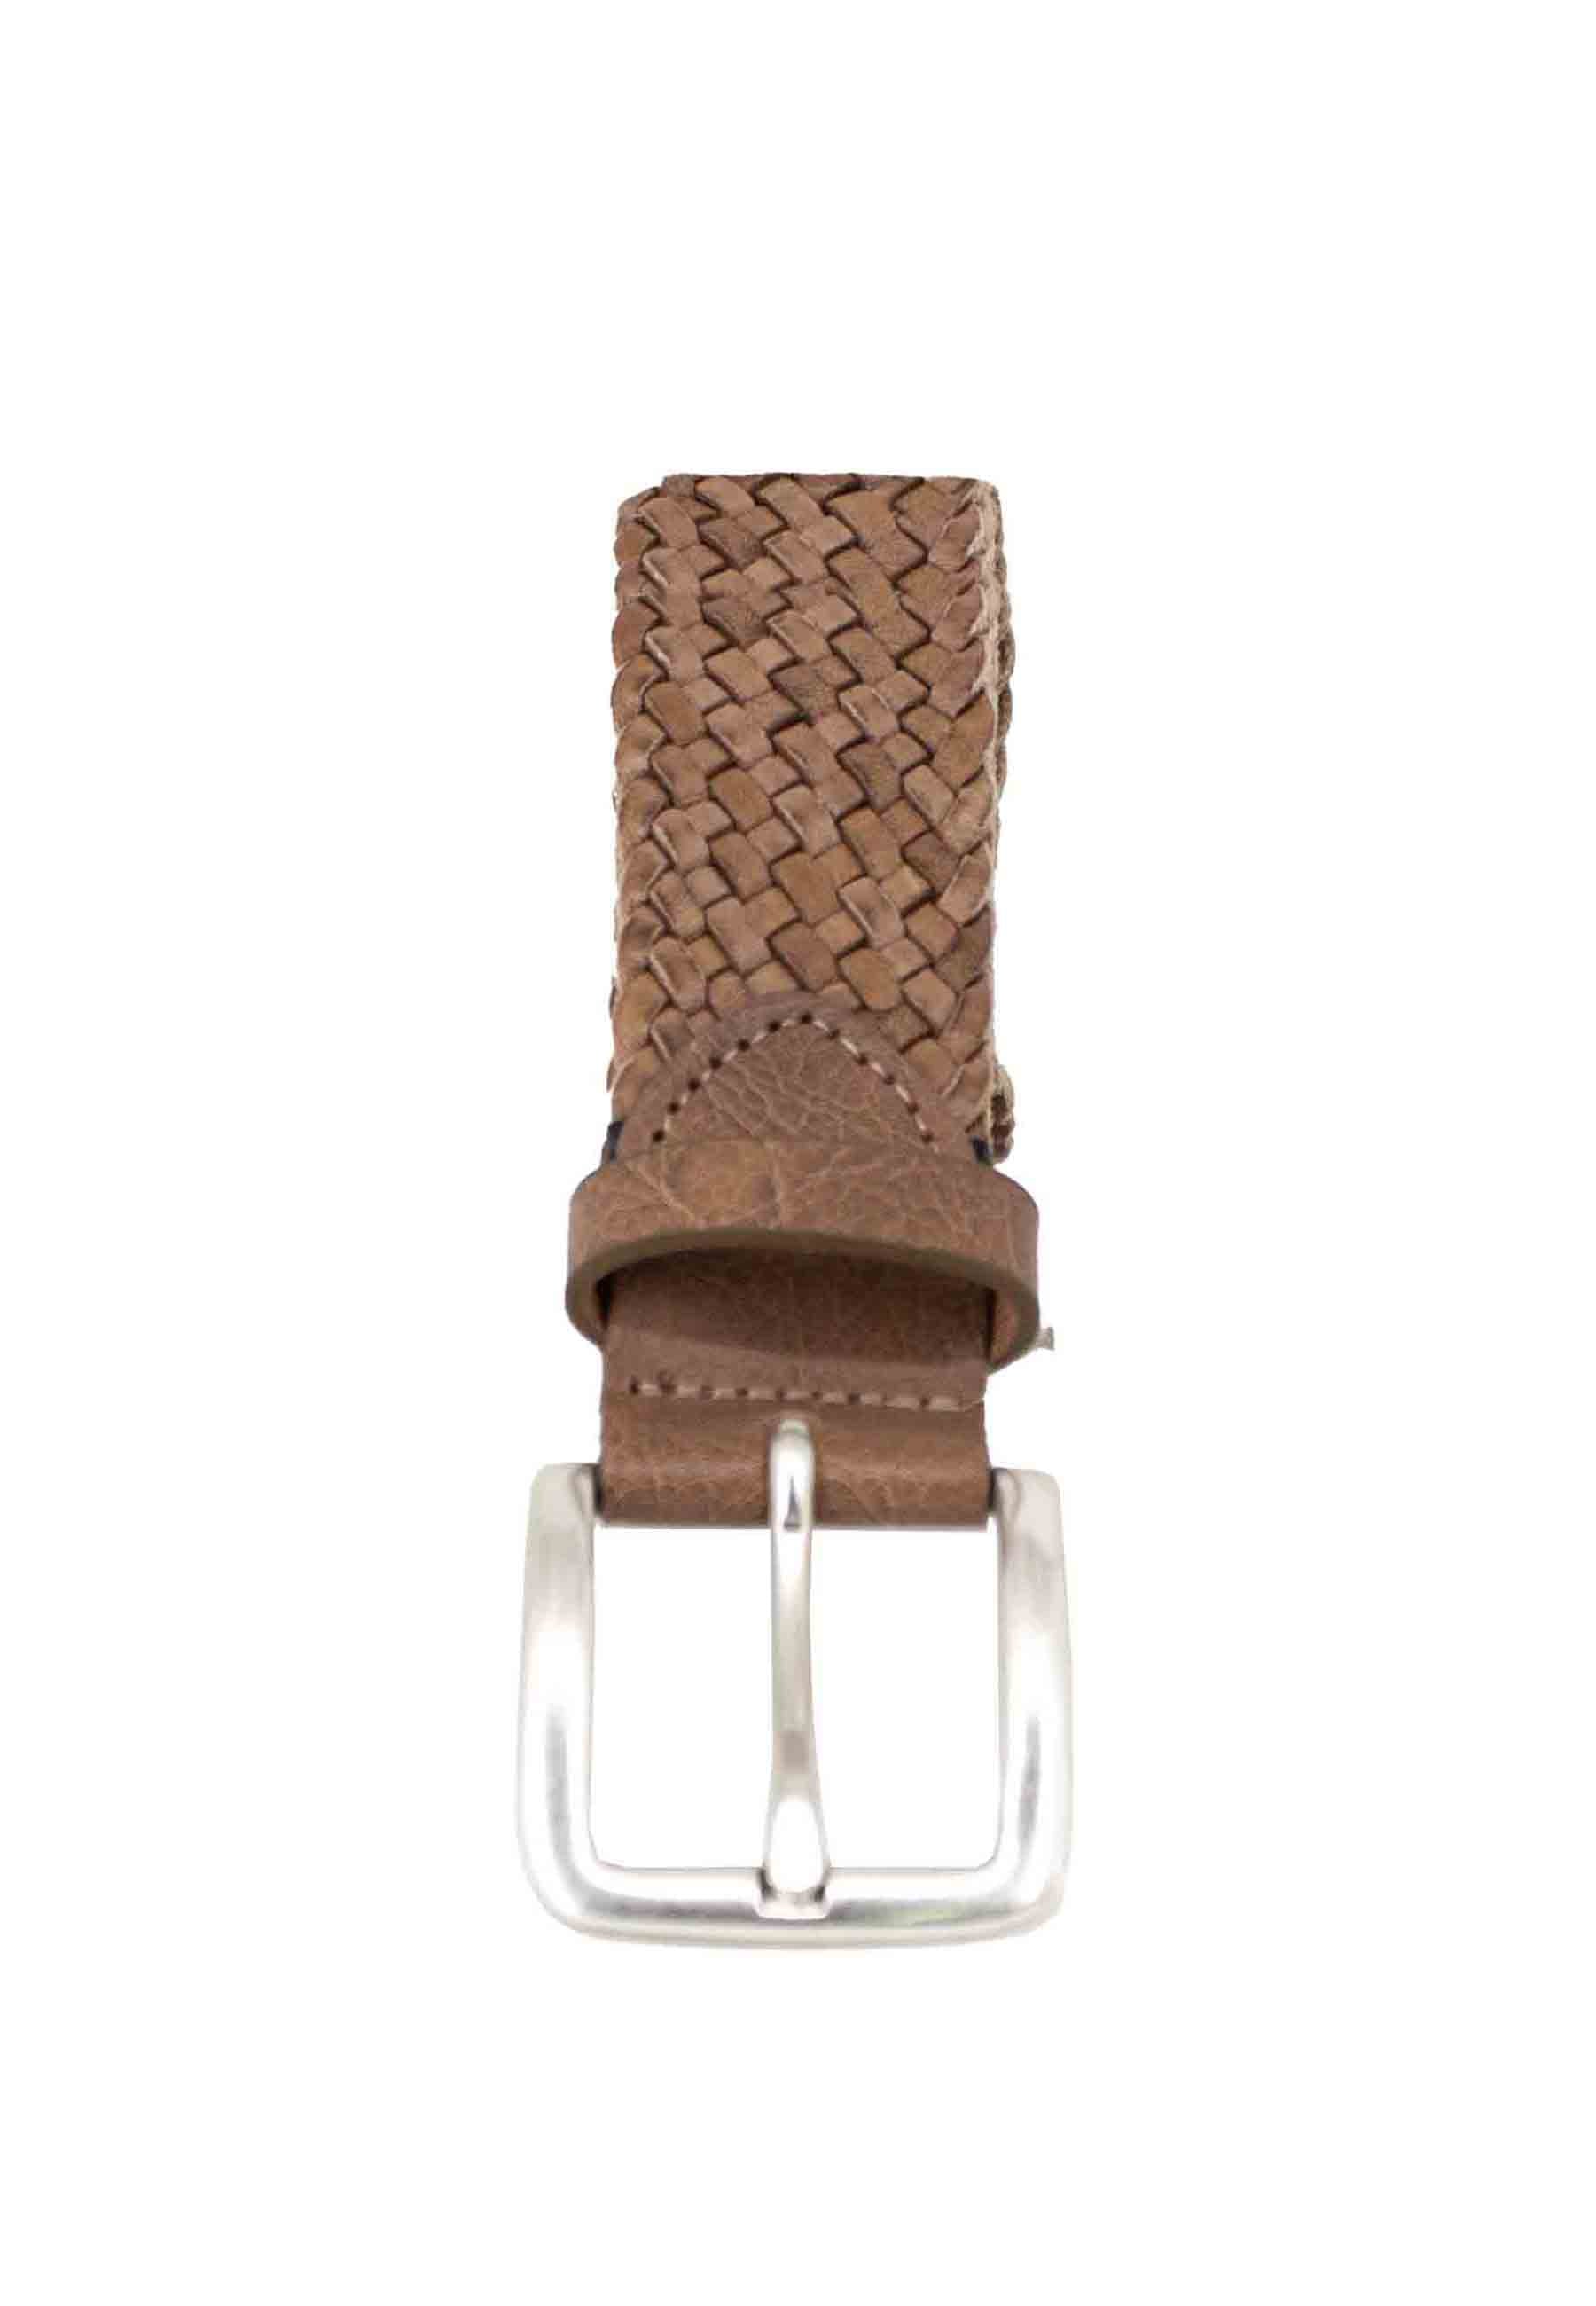 Men's taupe woven leather belt with silver buckle